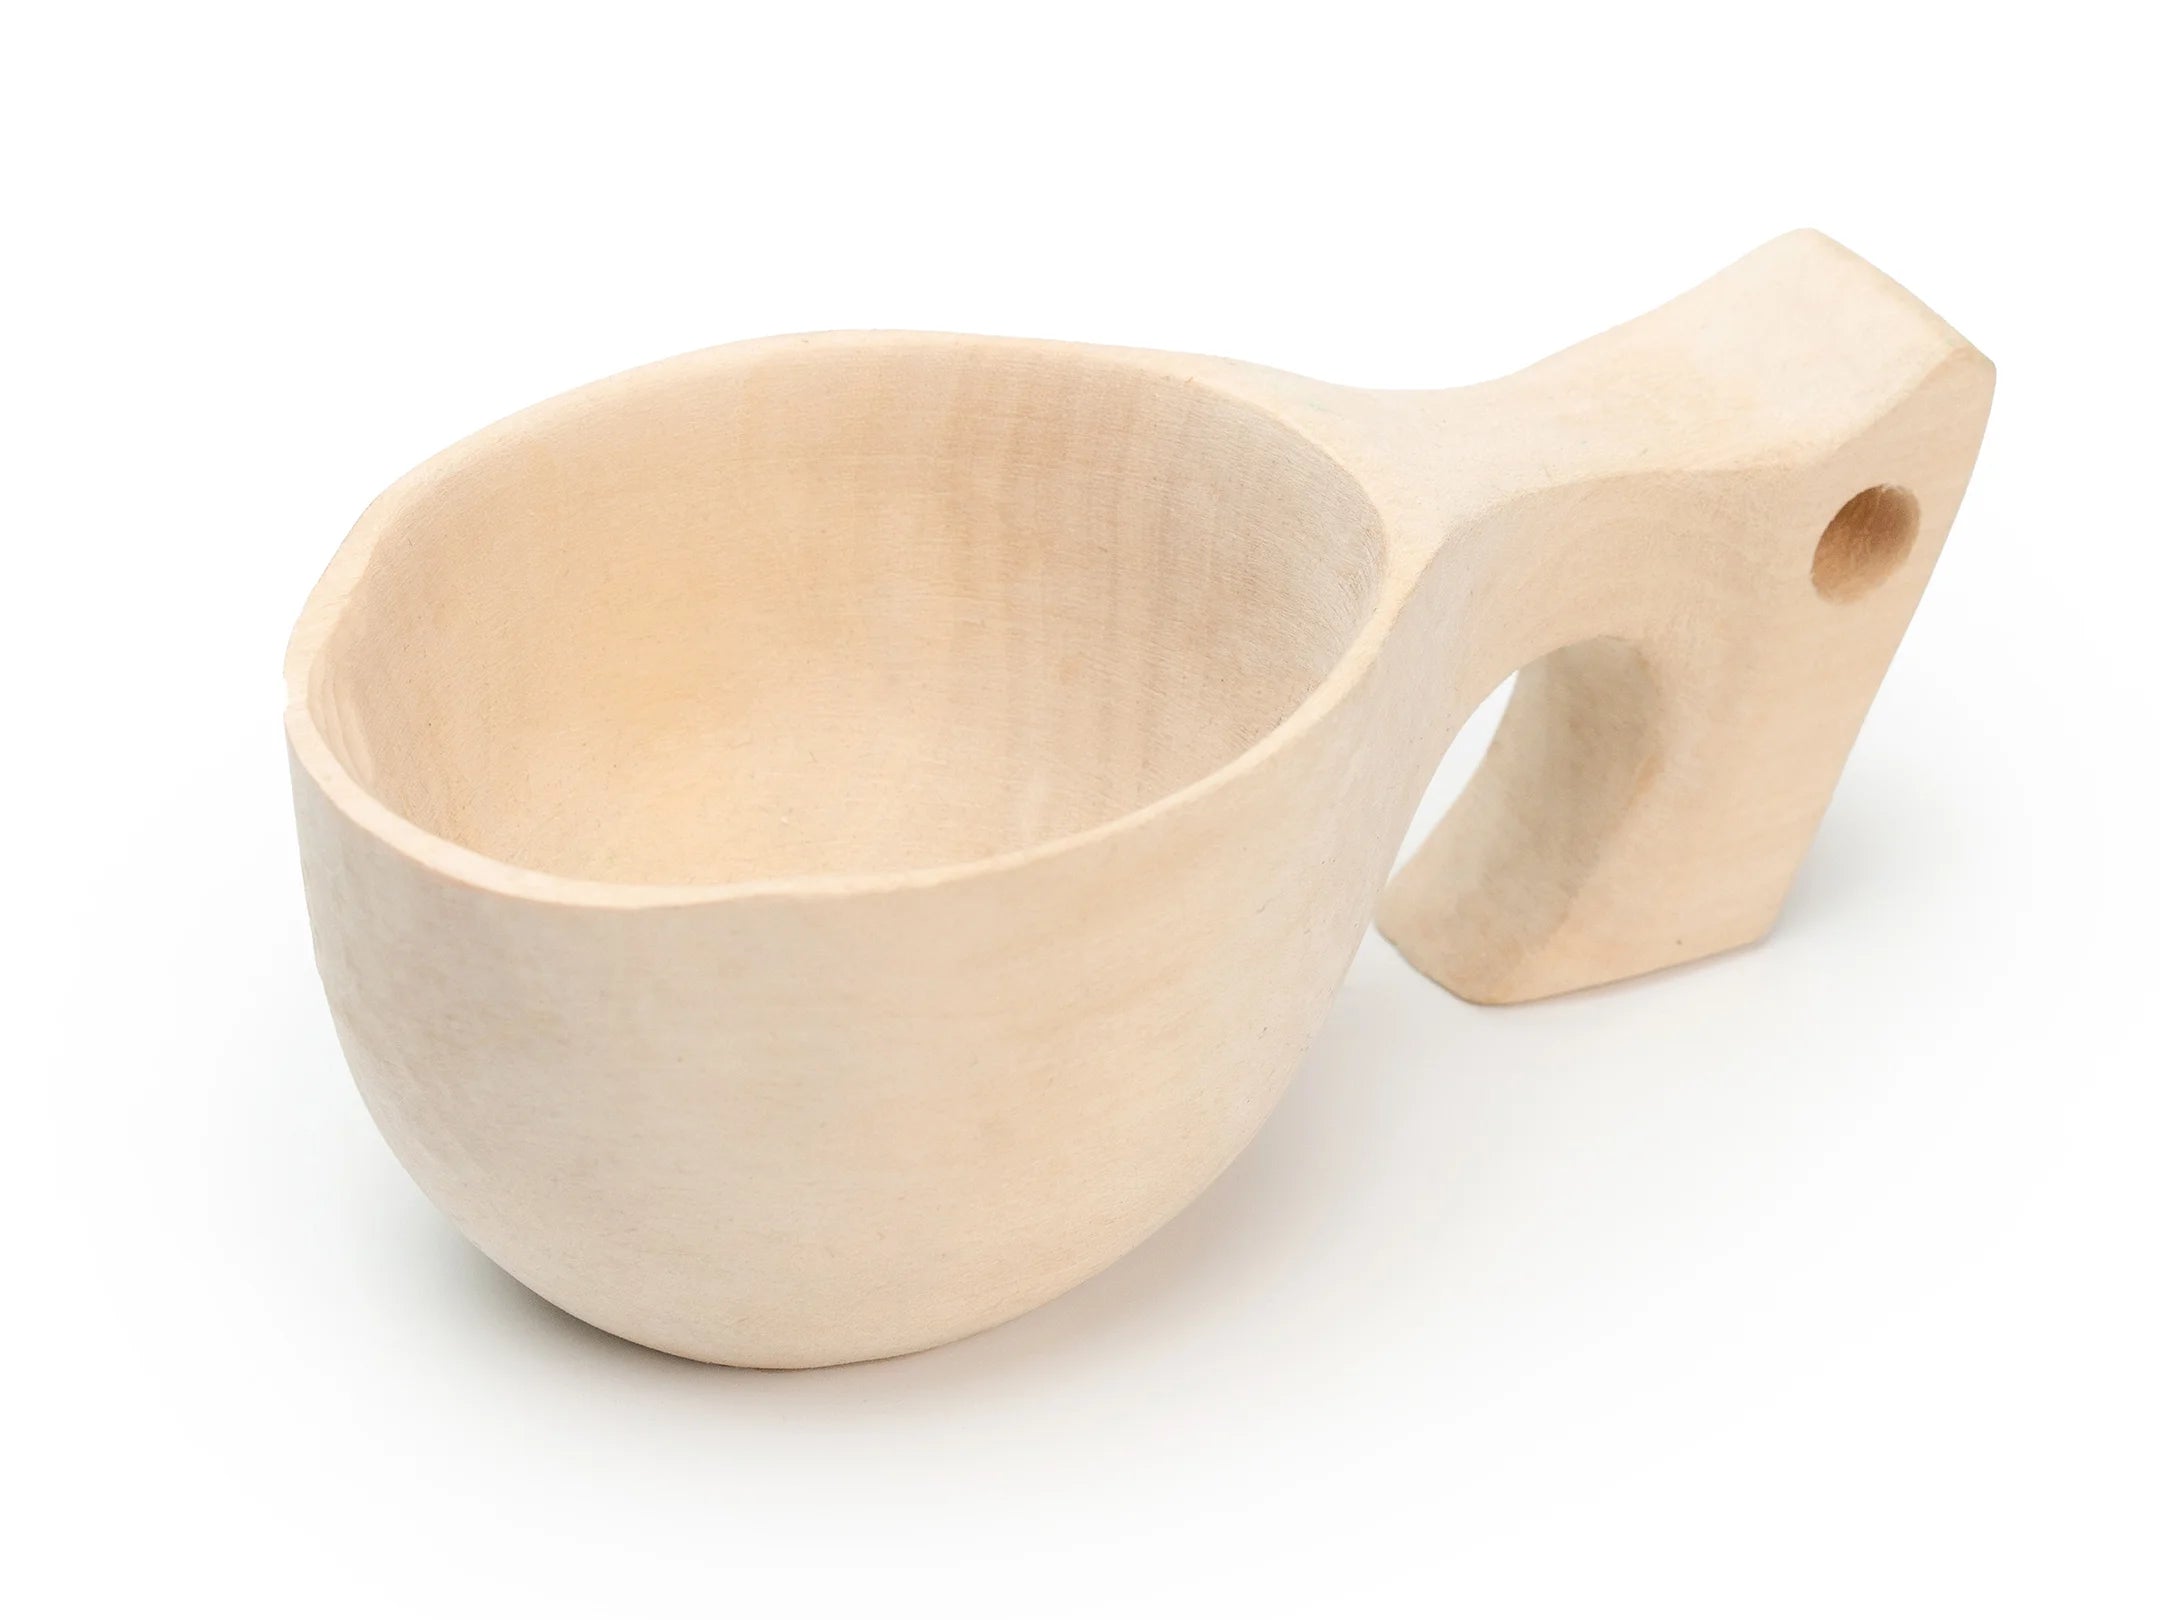 How to Carve a Kuksa: Make Your Own Wooden Cup or Bowl